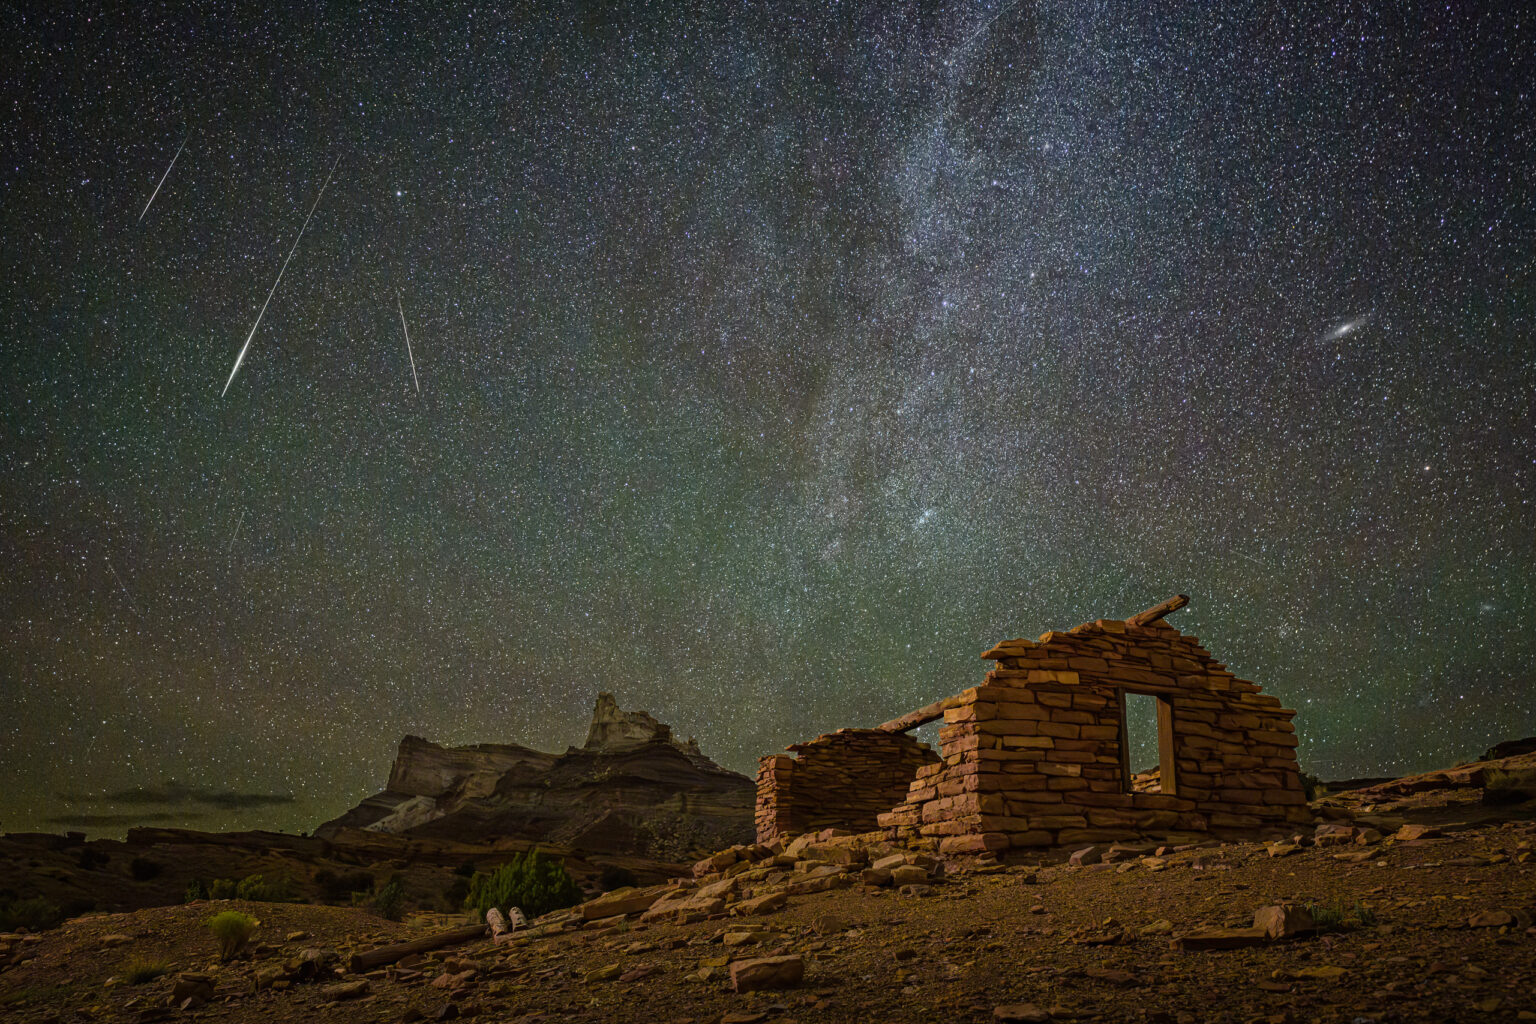 Meteors and stars over Utah's Temple Mountain